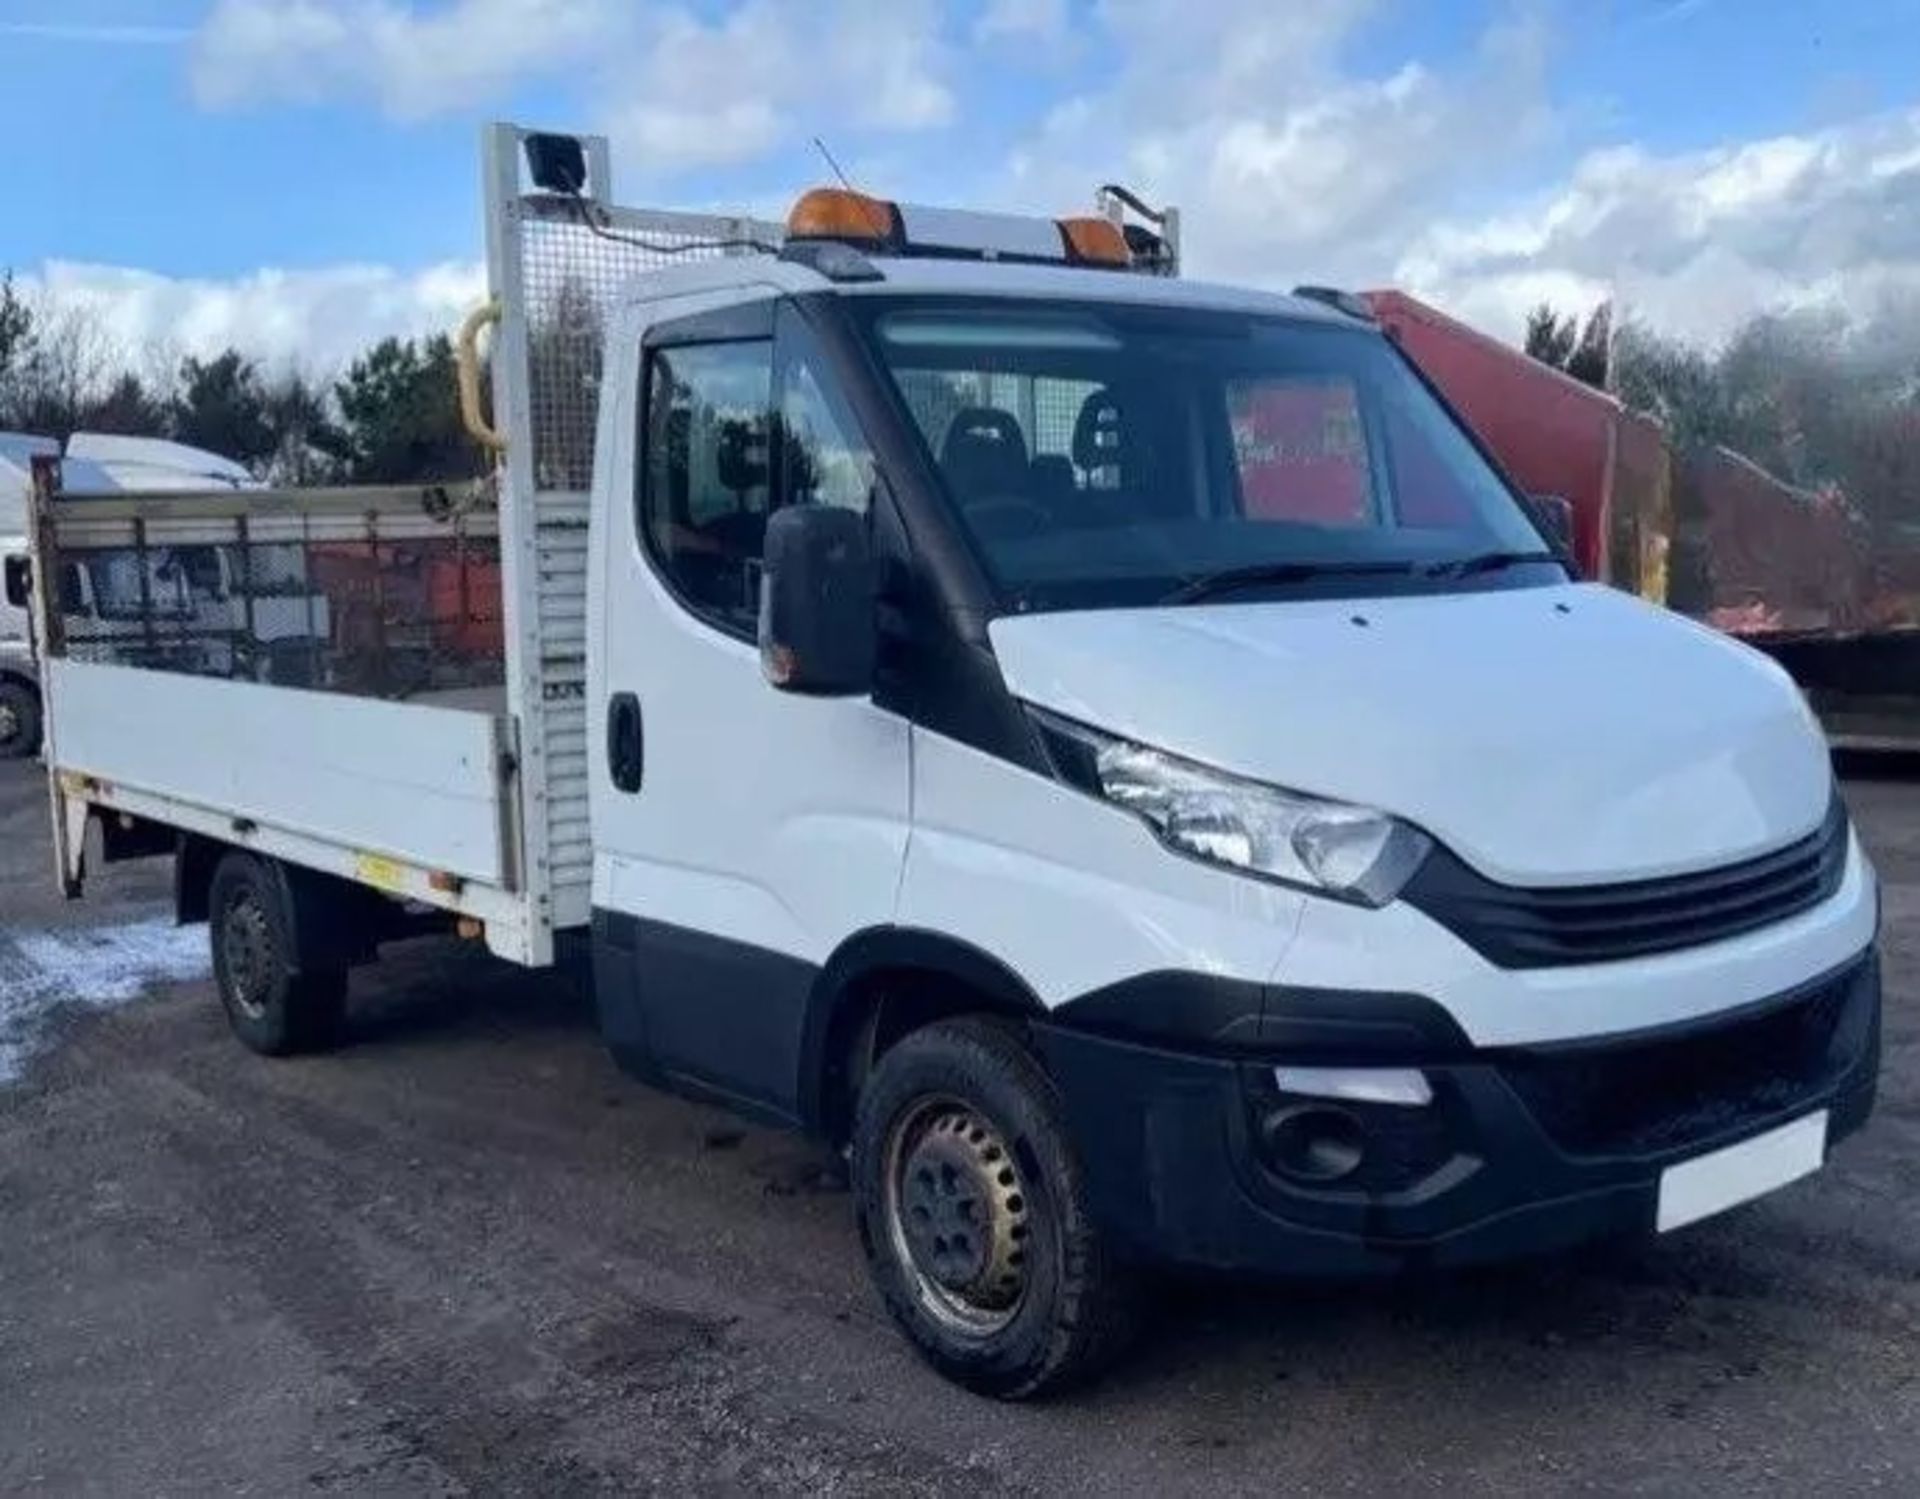 IVECO DAILY 35S14 LWB DROPSIDE + TAIL LIFT TRUCK 2017 - IDEAL FOR WORK & PLAY